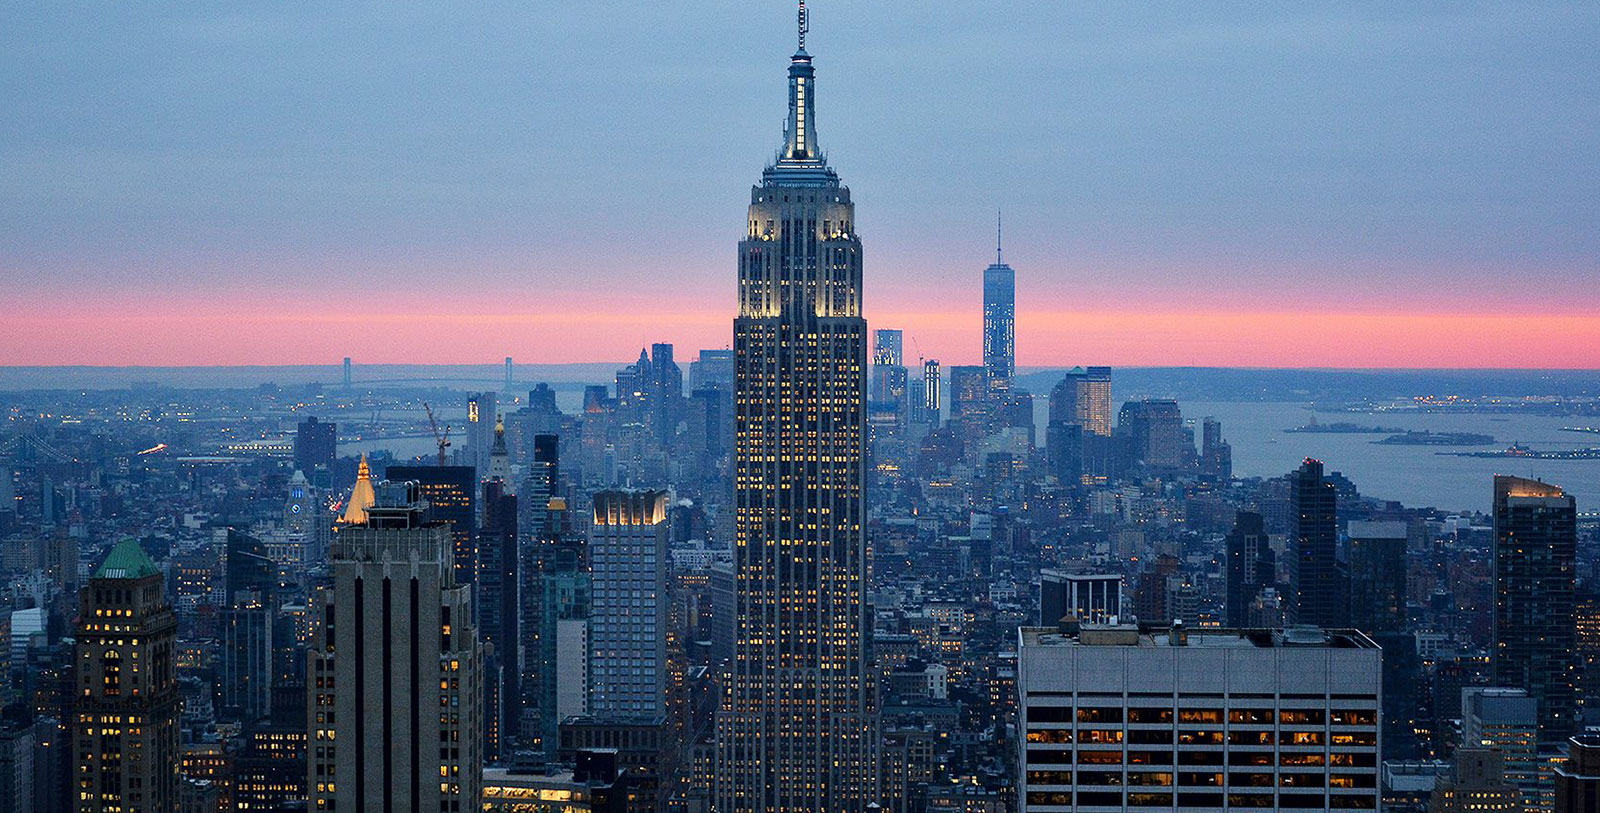 Tour the nearby Flatiron Building, the Empire State Building, and Grand Central Terminal.